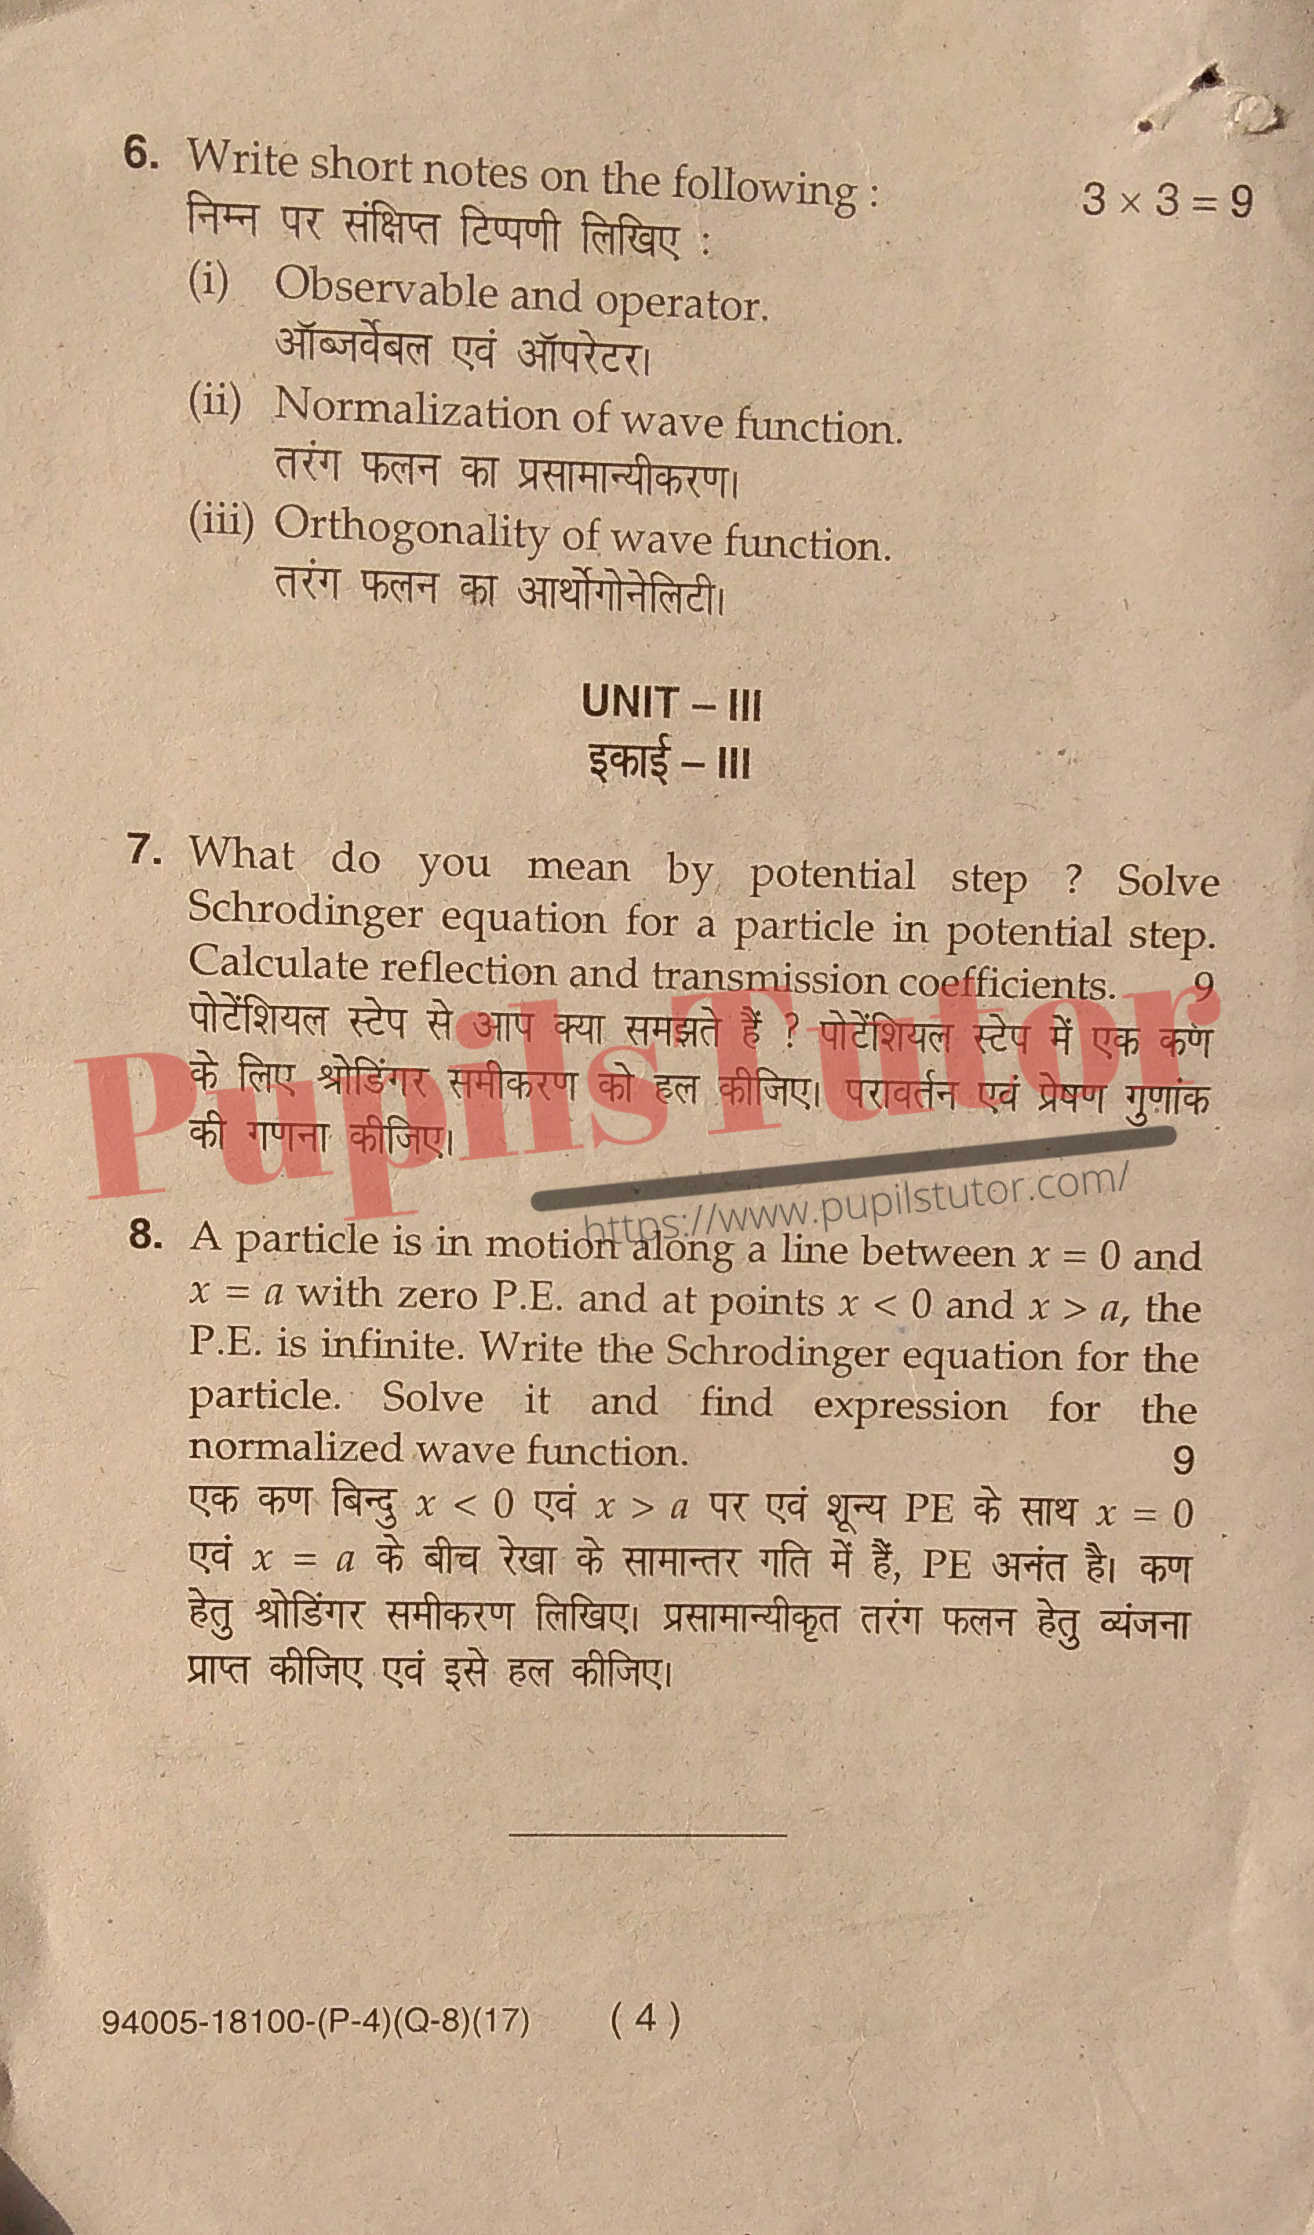 MDU (Maharshi Dayanand University, Rohtak Haryana) Pass And Honors (B.Sc. [Physics] – Bachelor of Science) Quantum Mechanics Important Questions Of November, 2017 Exam PDF Download Free (Page 4)